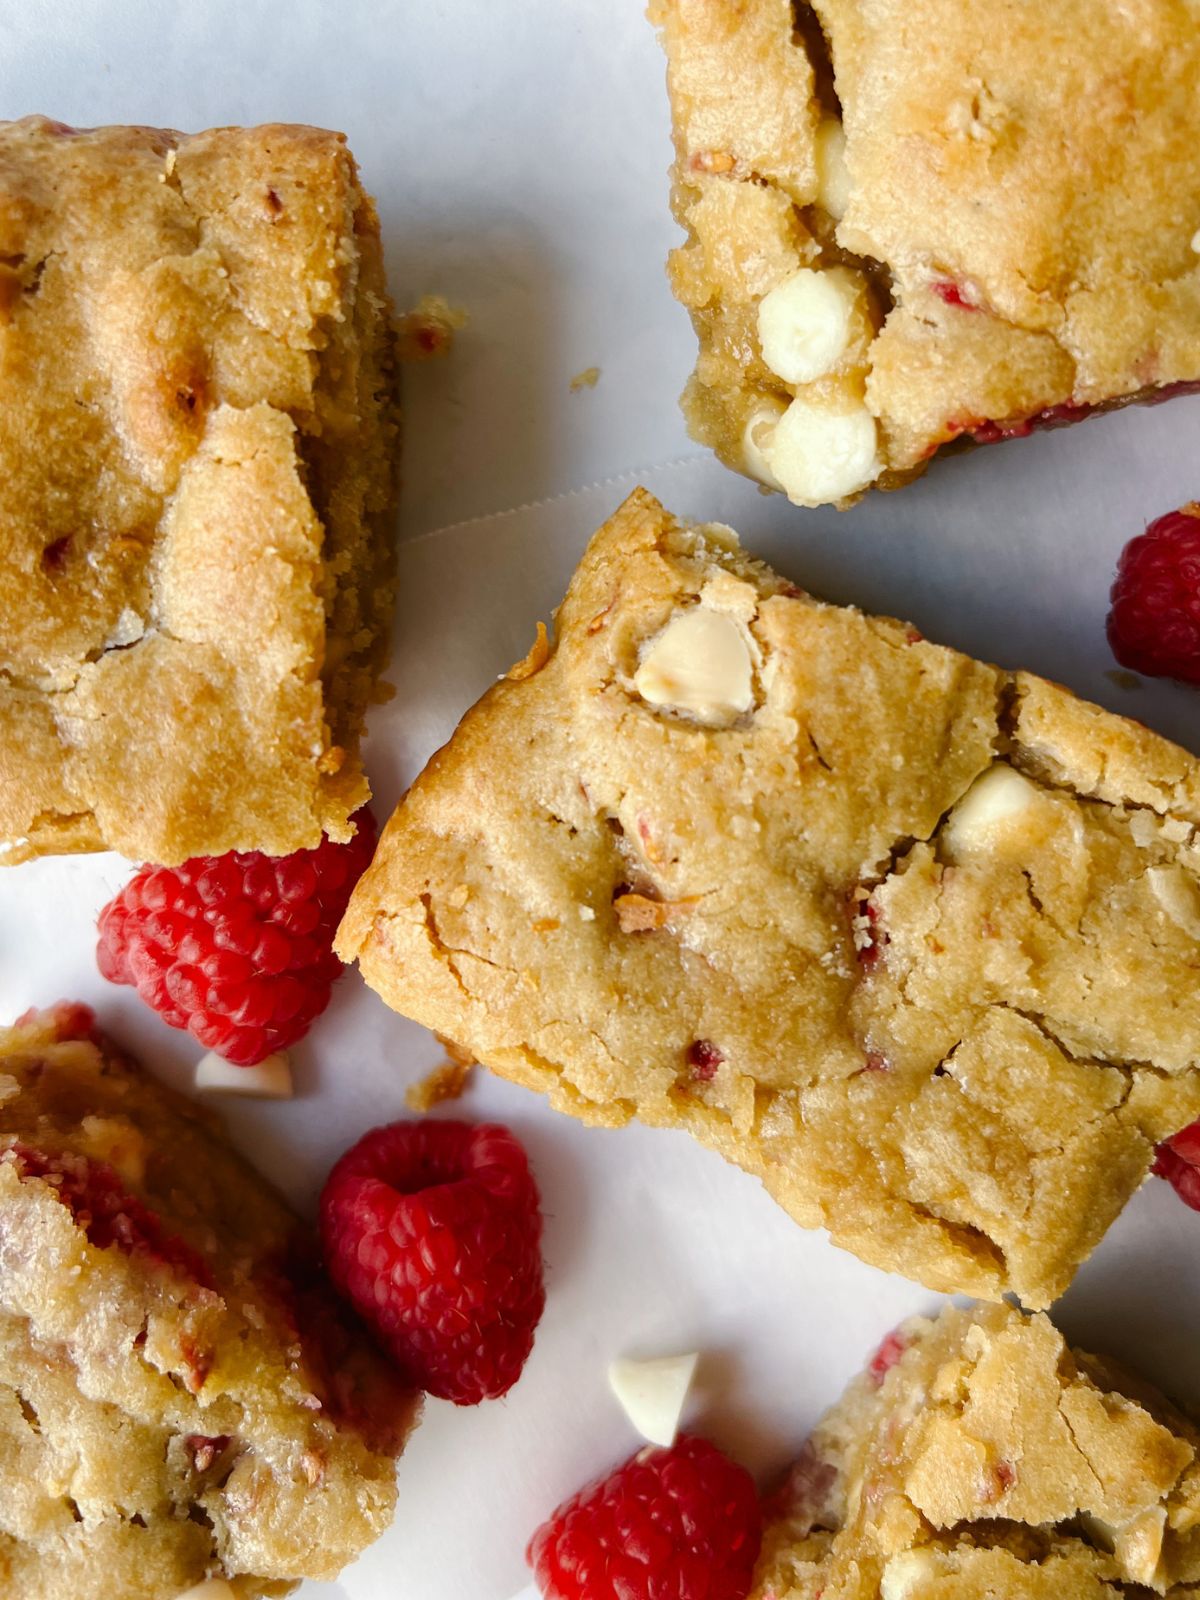 Several white chocolate raspberry blondies on parchment paper surrounded by white chocolate chips and raspberries.